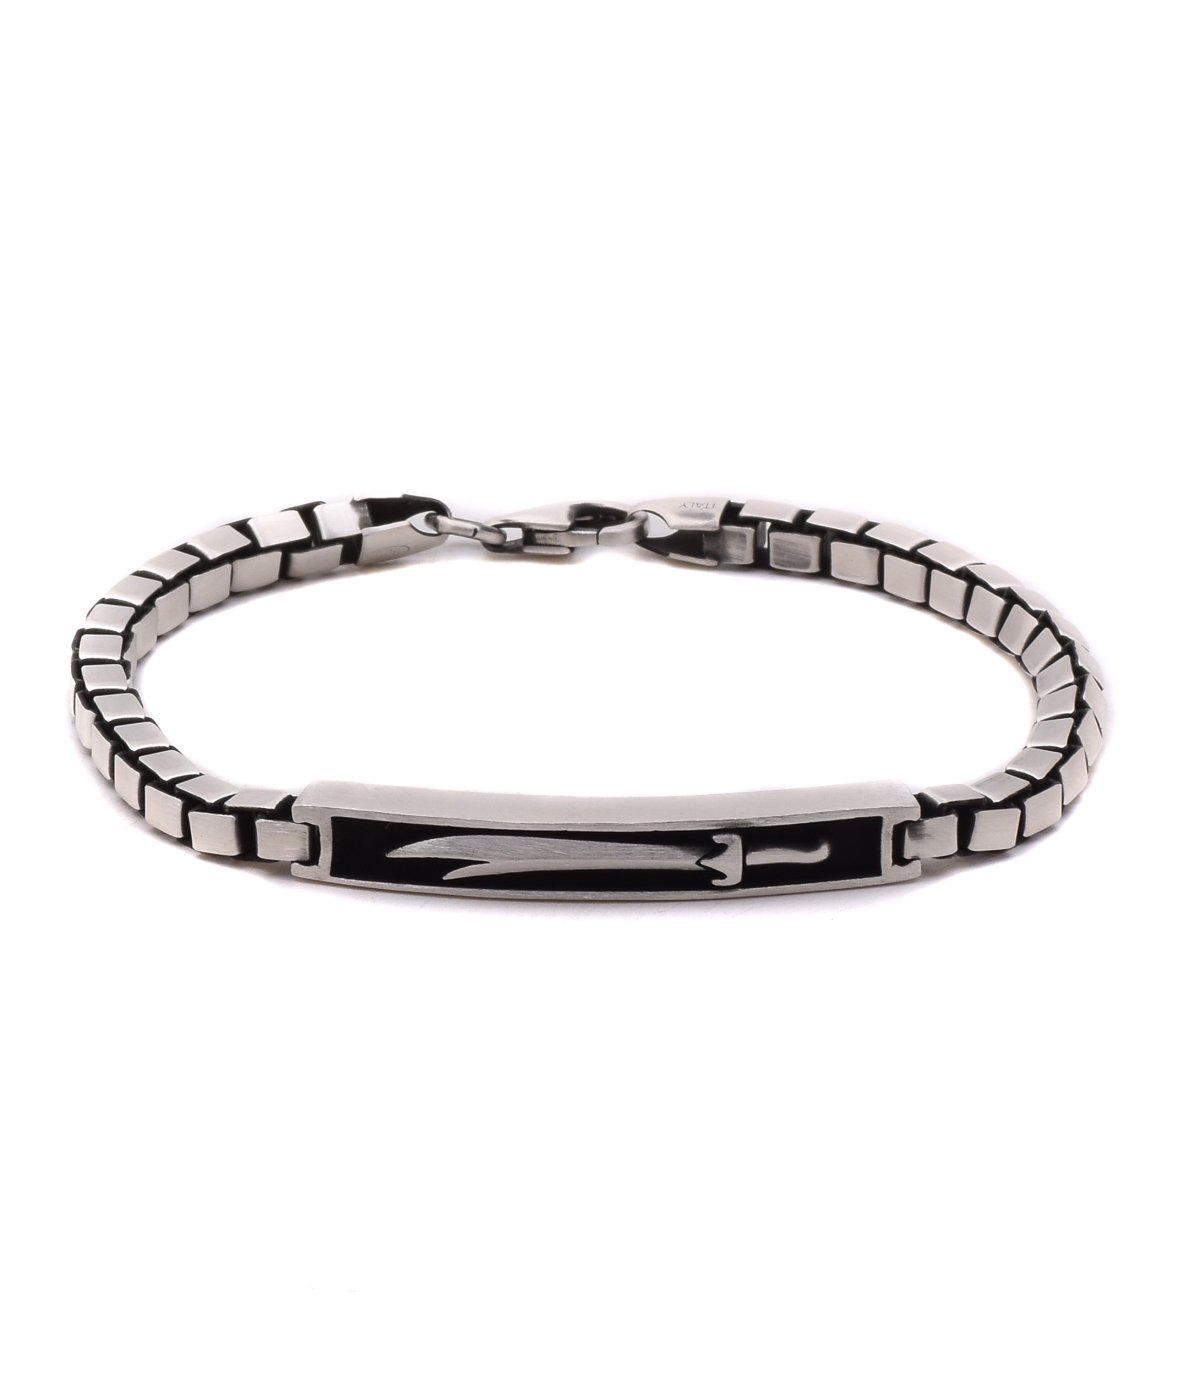 Boy's 5 1/2 Or 6 1/2 Inches Silver ID Bracelet For Babies, Toddlers An –  Loveivy.com